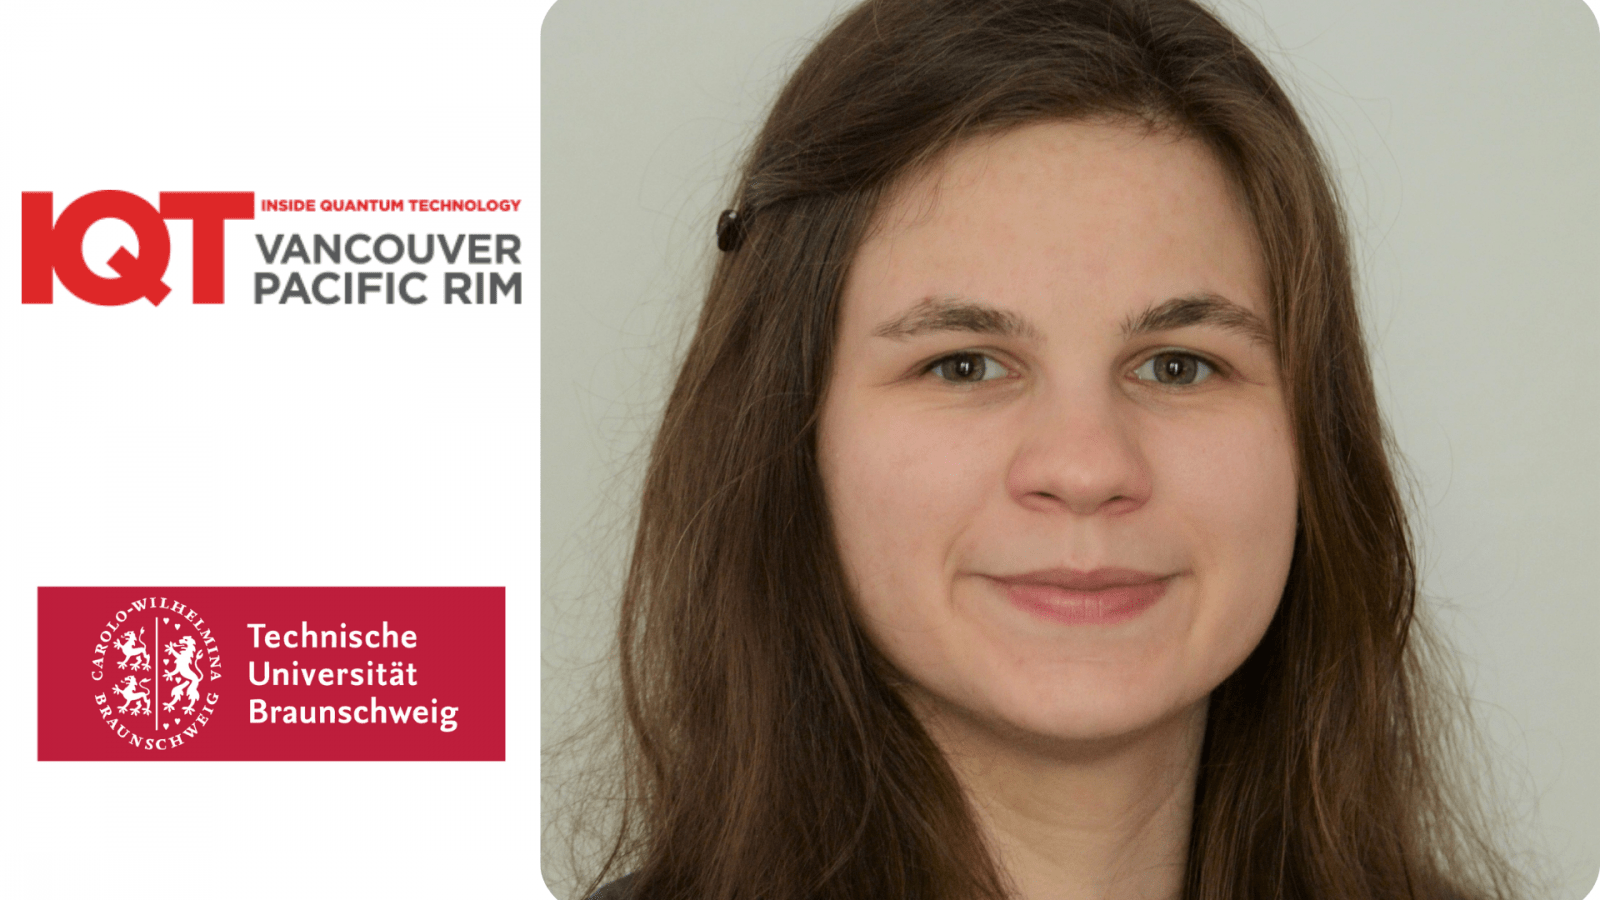 Franziska Greinert, Research Assistant at Technical University Braunschweig is an IQT Vancouver/Pacific Rim Speaker for the 2024 Conference